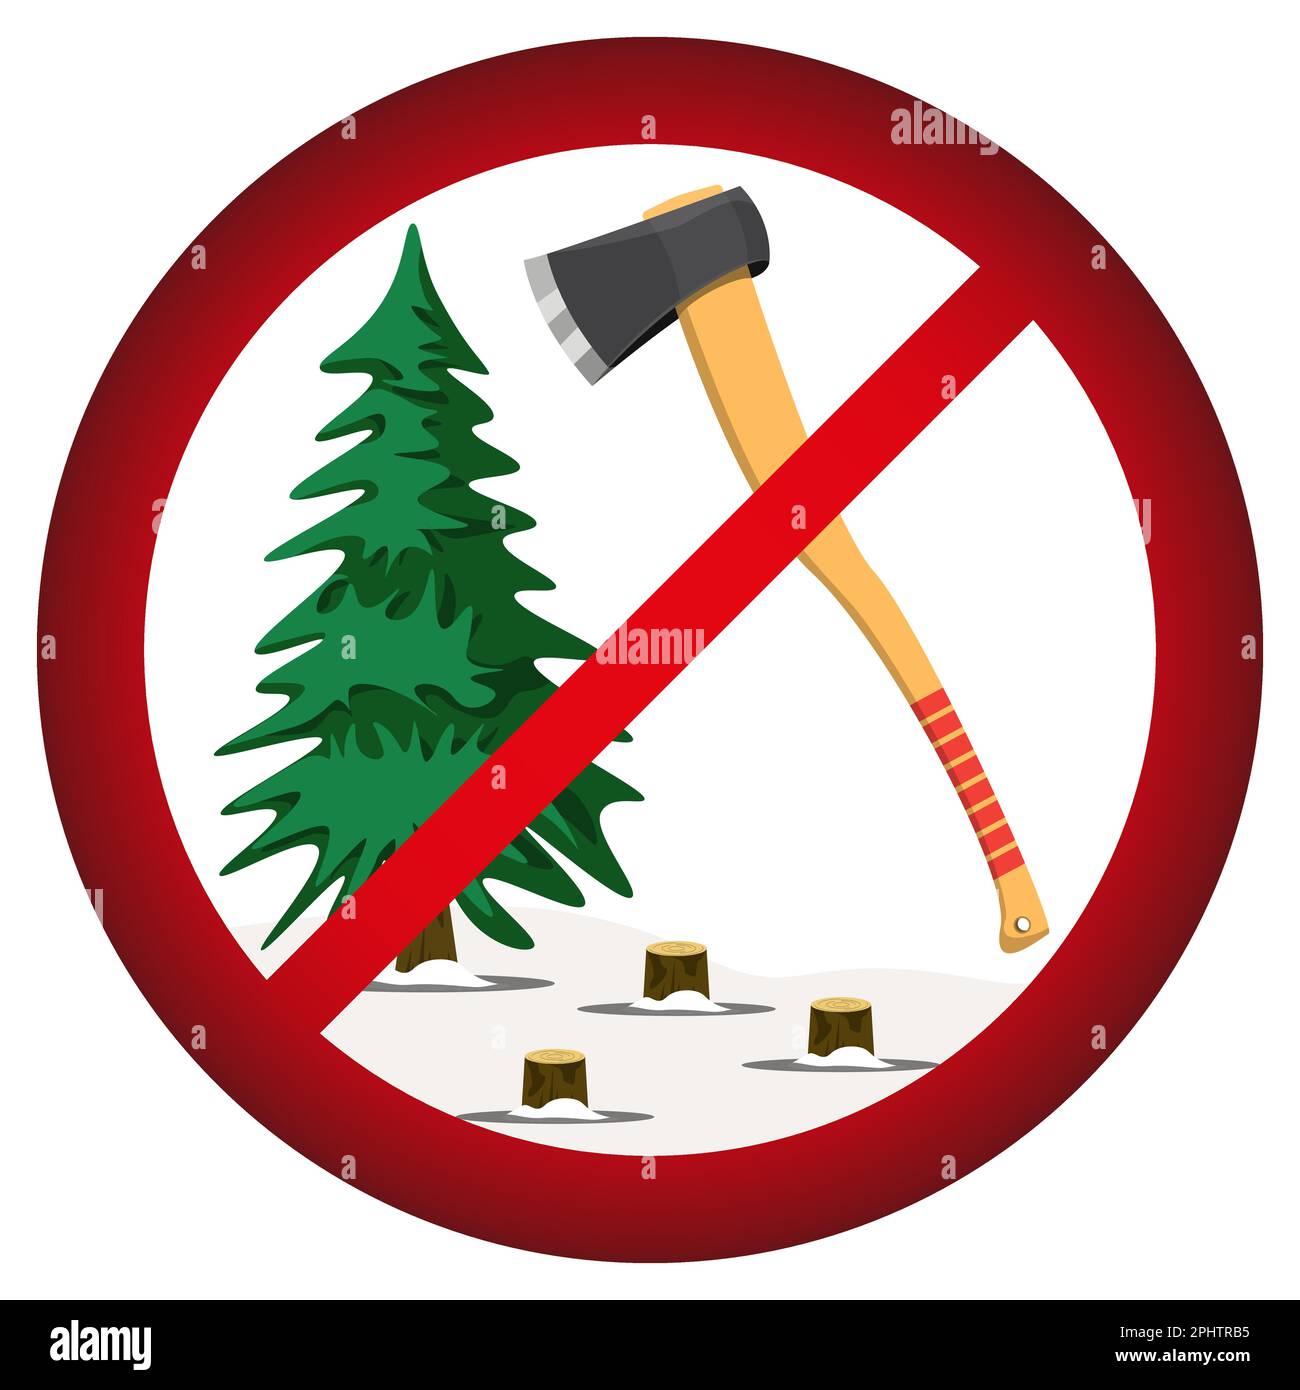 Sign in realistic style. Stop cutting down live trees for Christmas. Christmas tree and Axe. Colorful vector illustration on a white background. Stock Vector